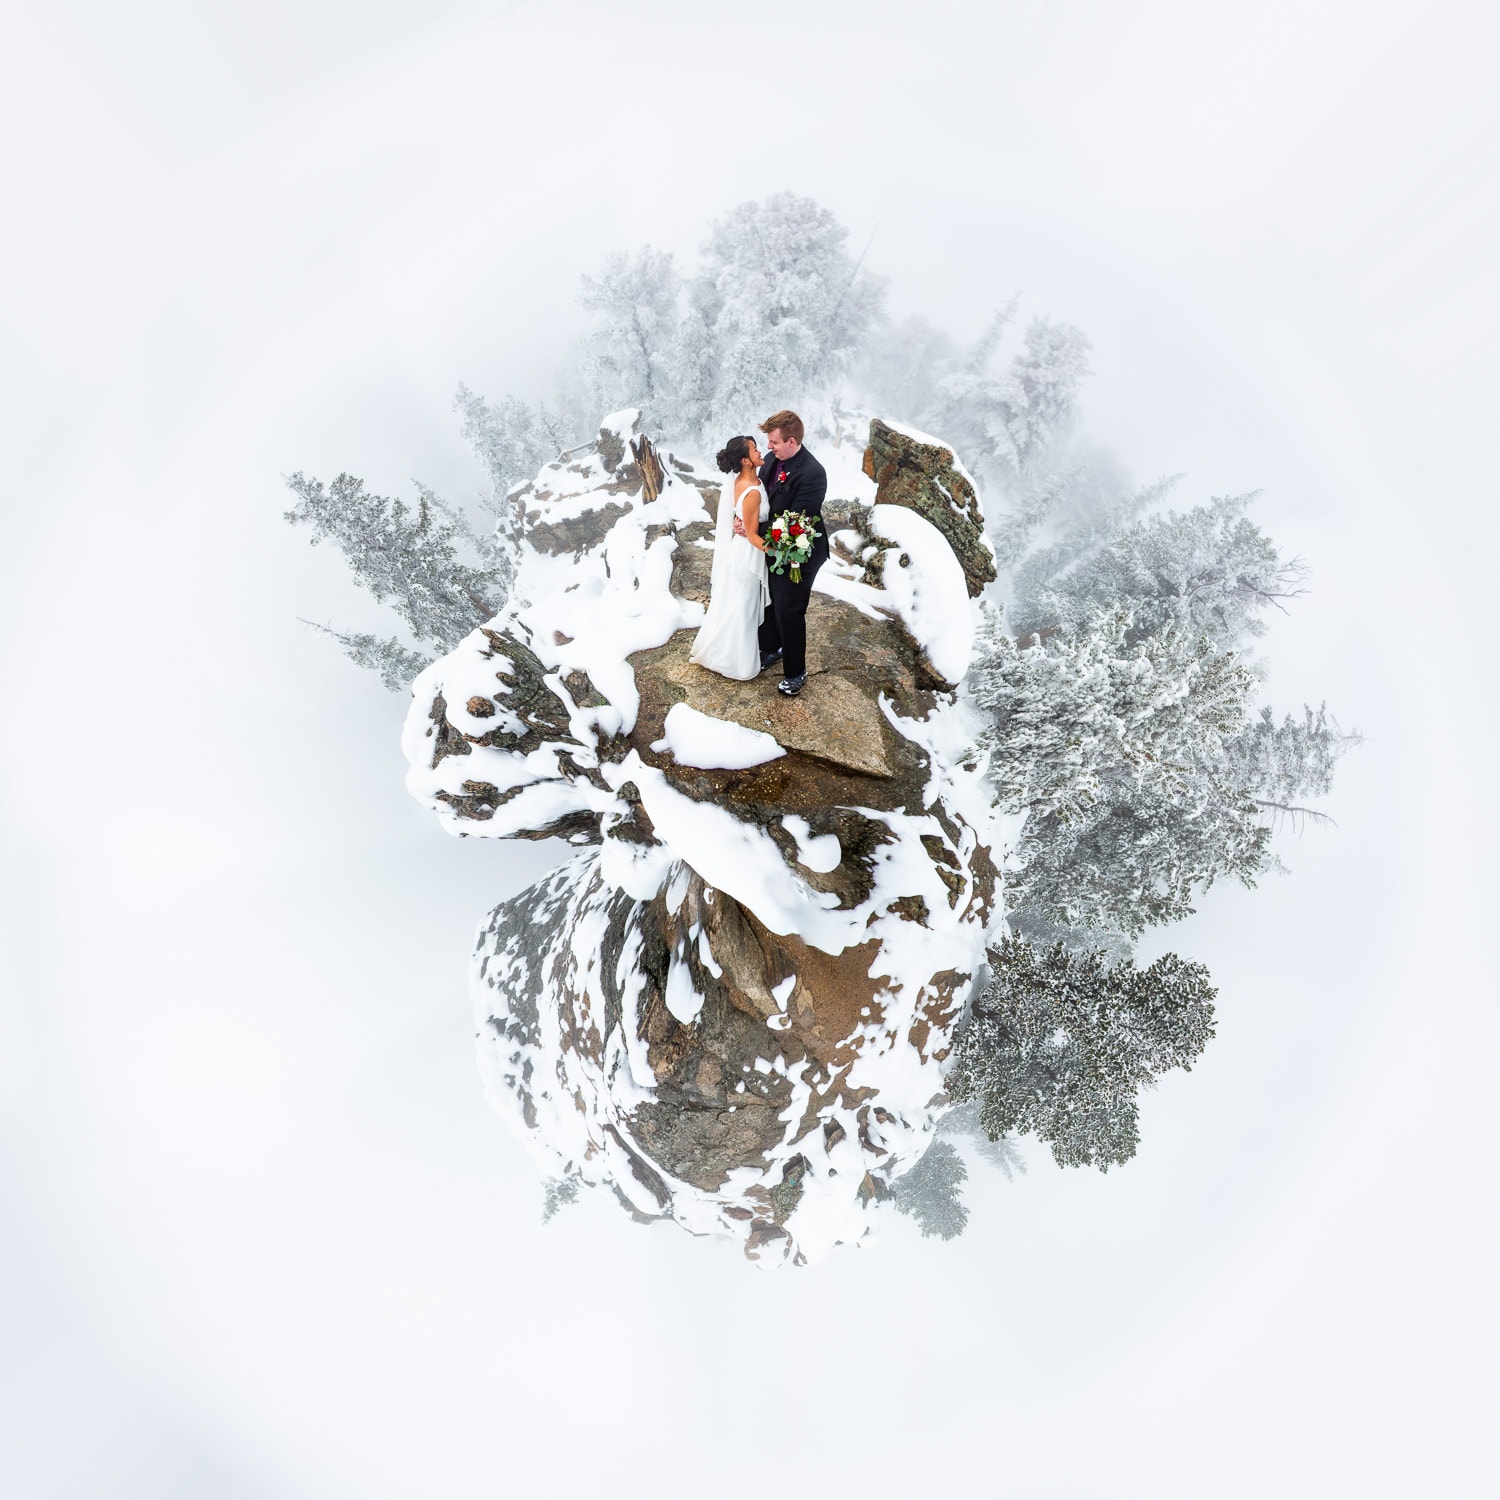 A photo effect shows a tiny planet of a winter wedding couple in the mountains.